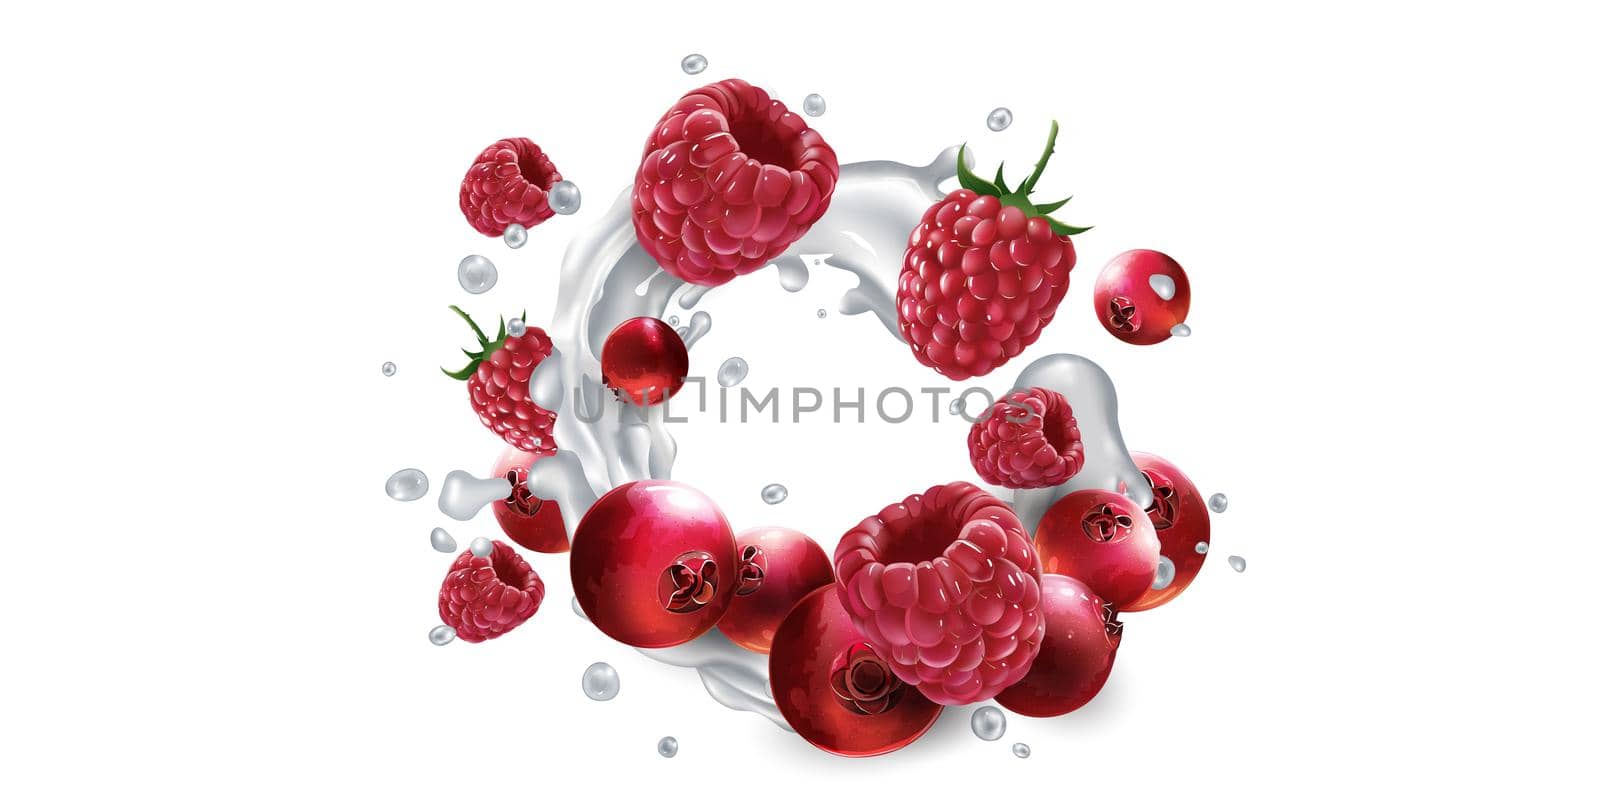 Fresh cranberries and raspberries in milk splashes on a white background. Realistic style illustration.